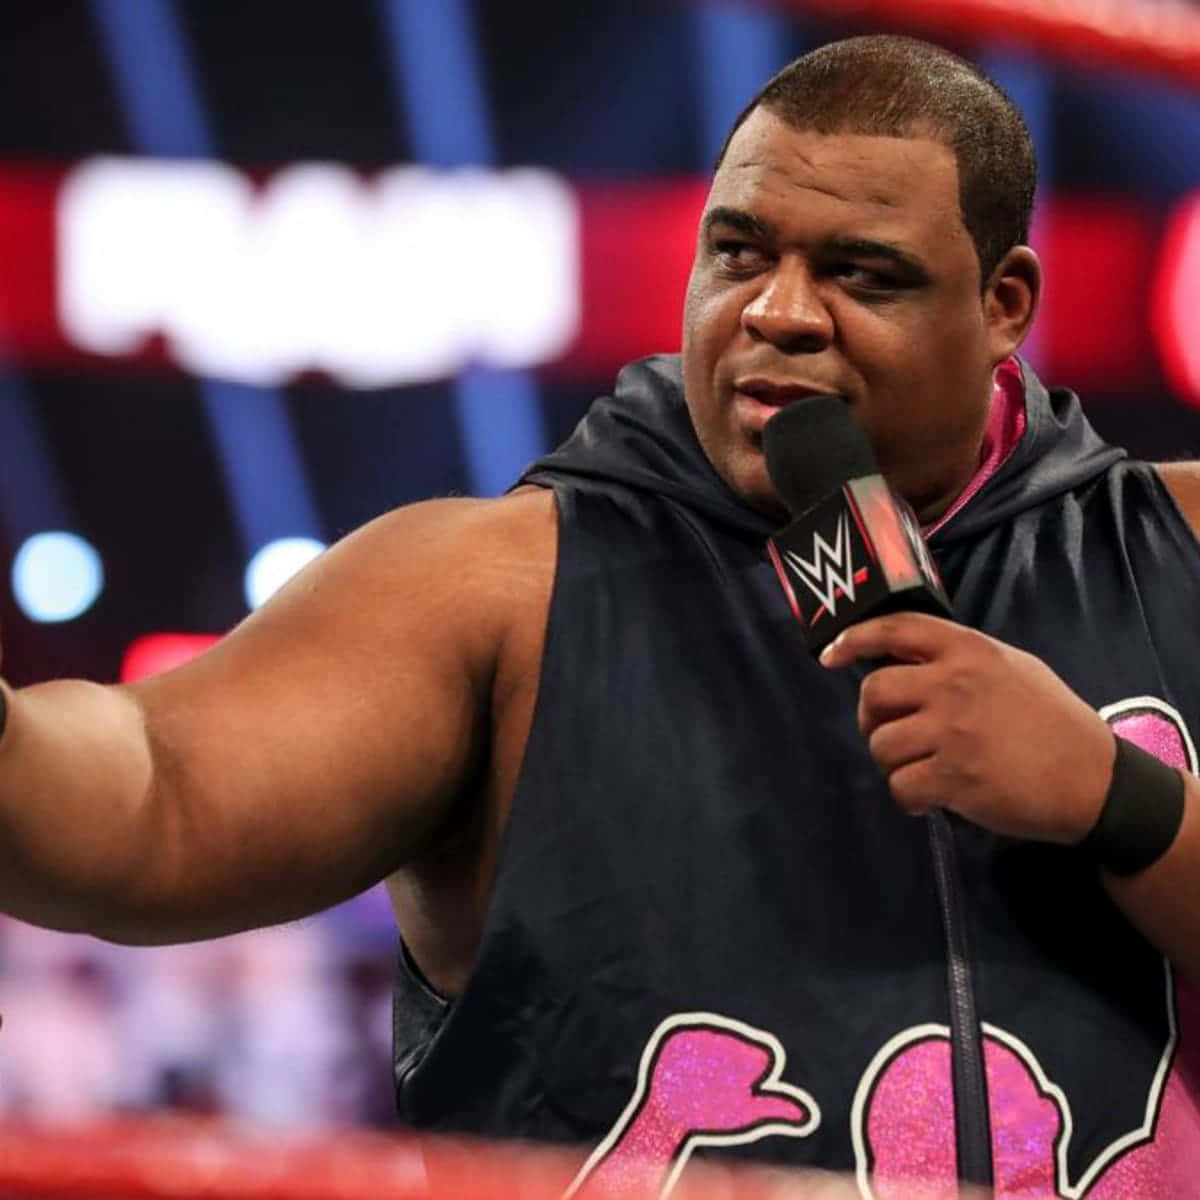 WWE Superstar Keith Lee Reacting To A Fan's Cheer Wallpaper